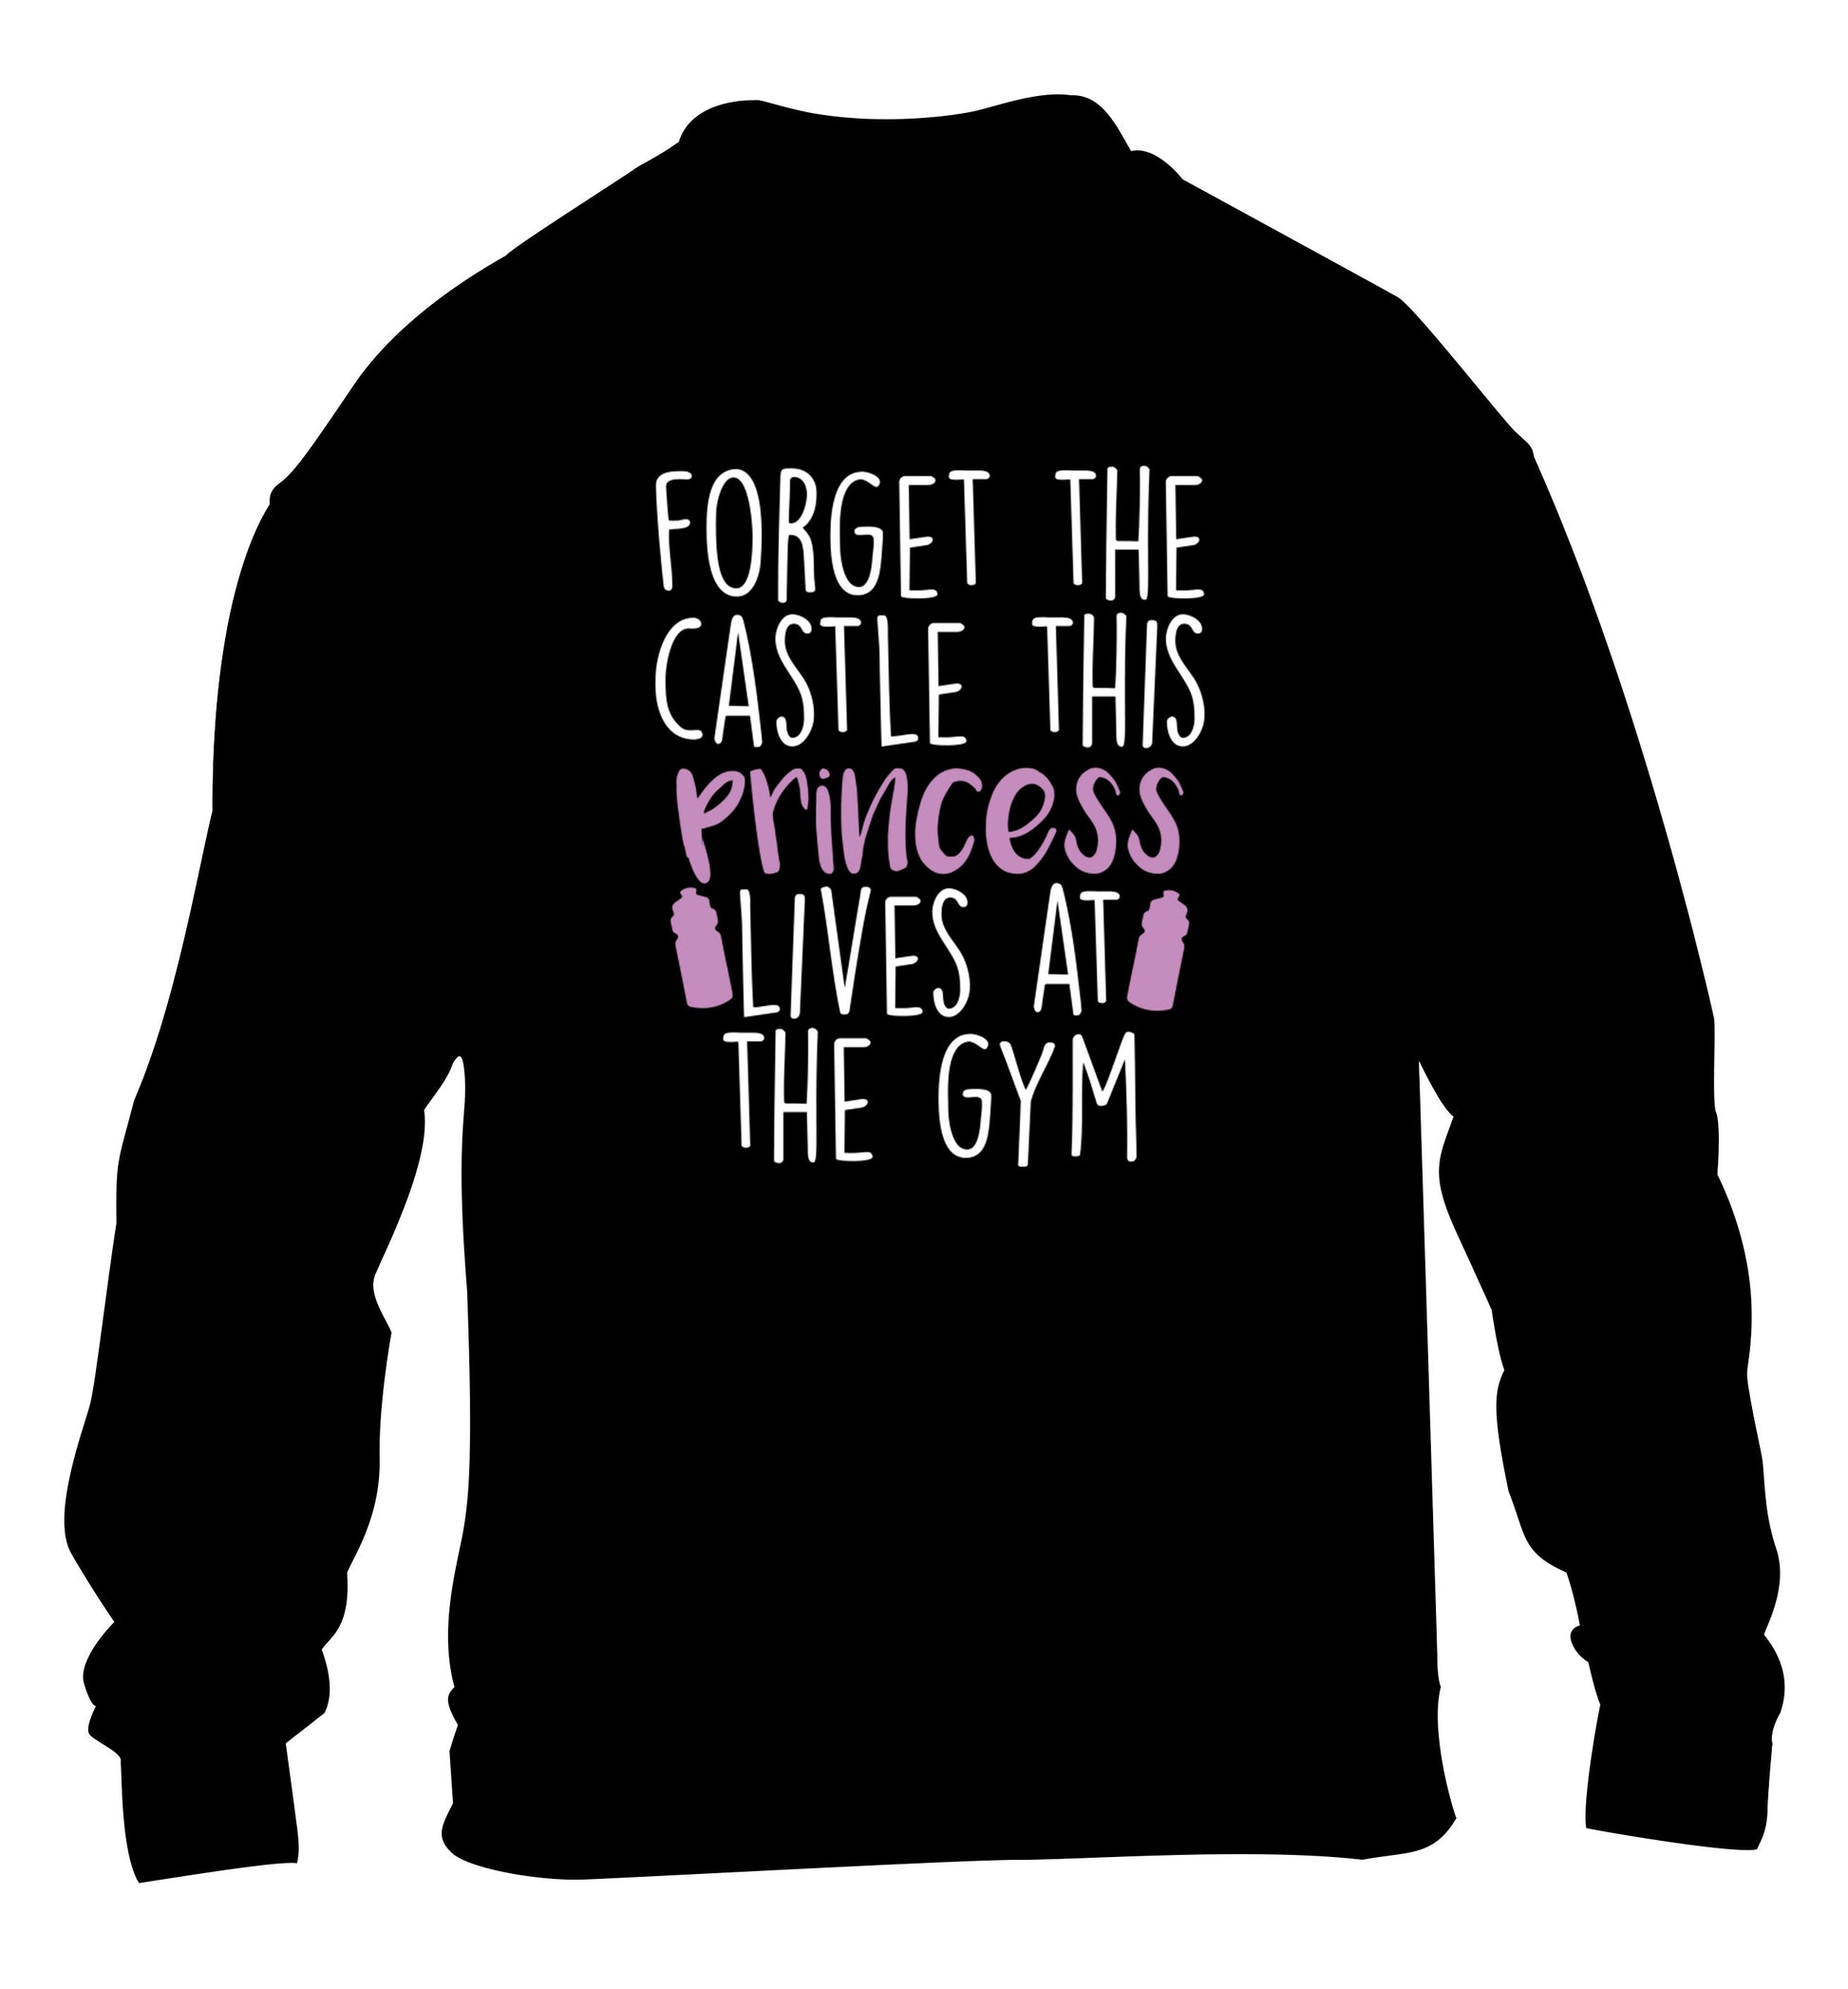 Forget the castle this princess lives at the gym children's black sweater 12-14 Years